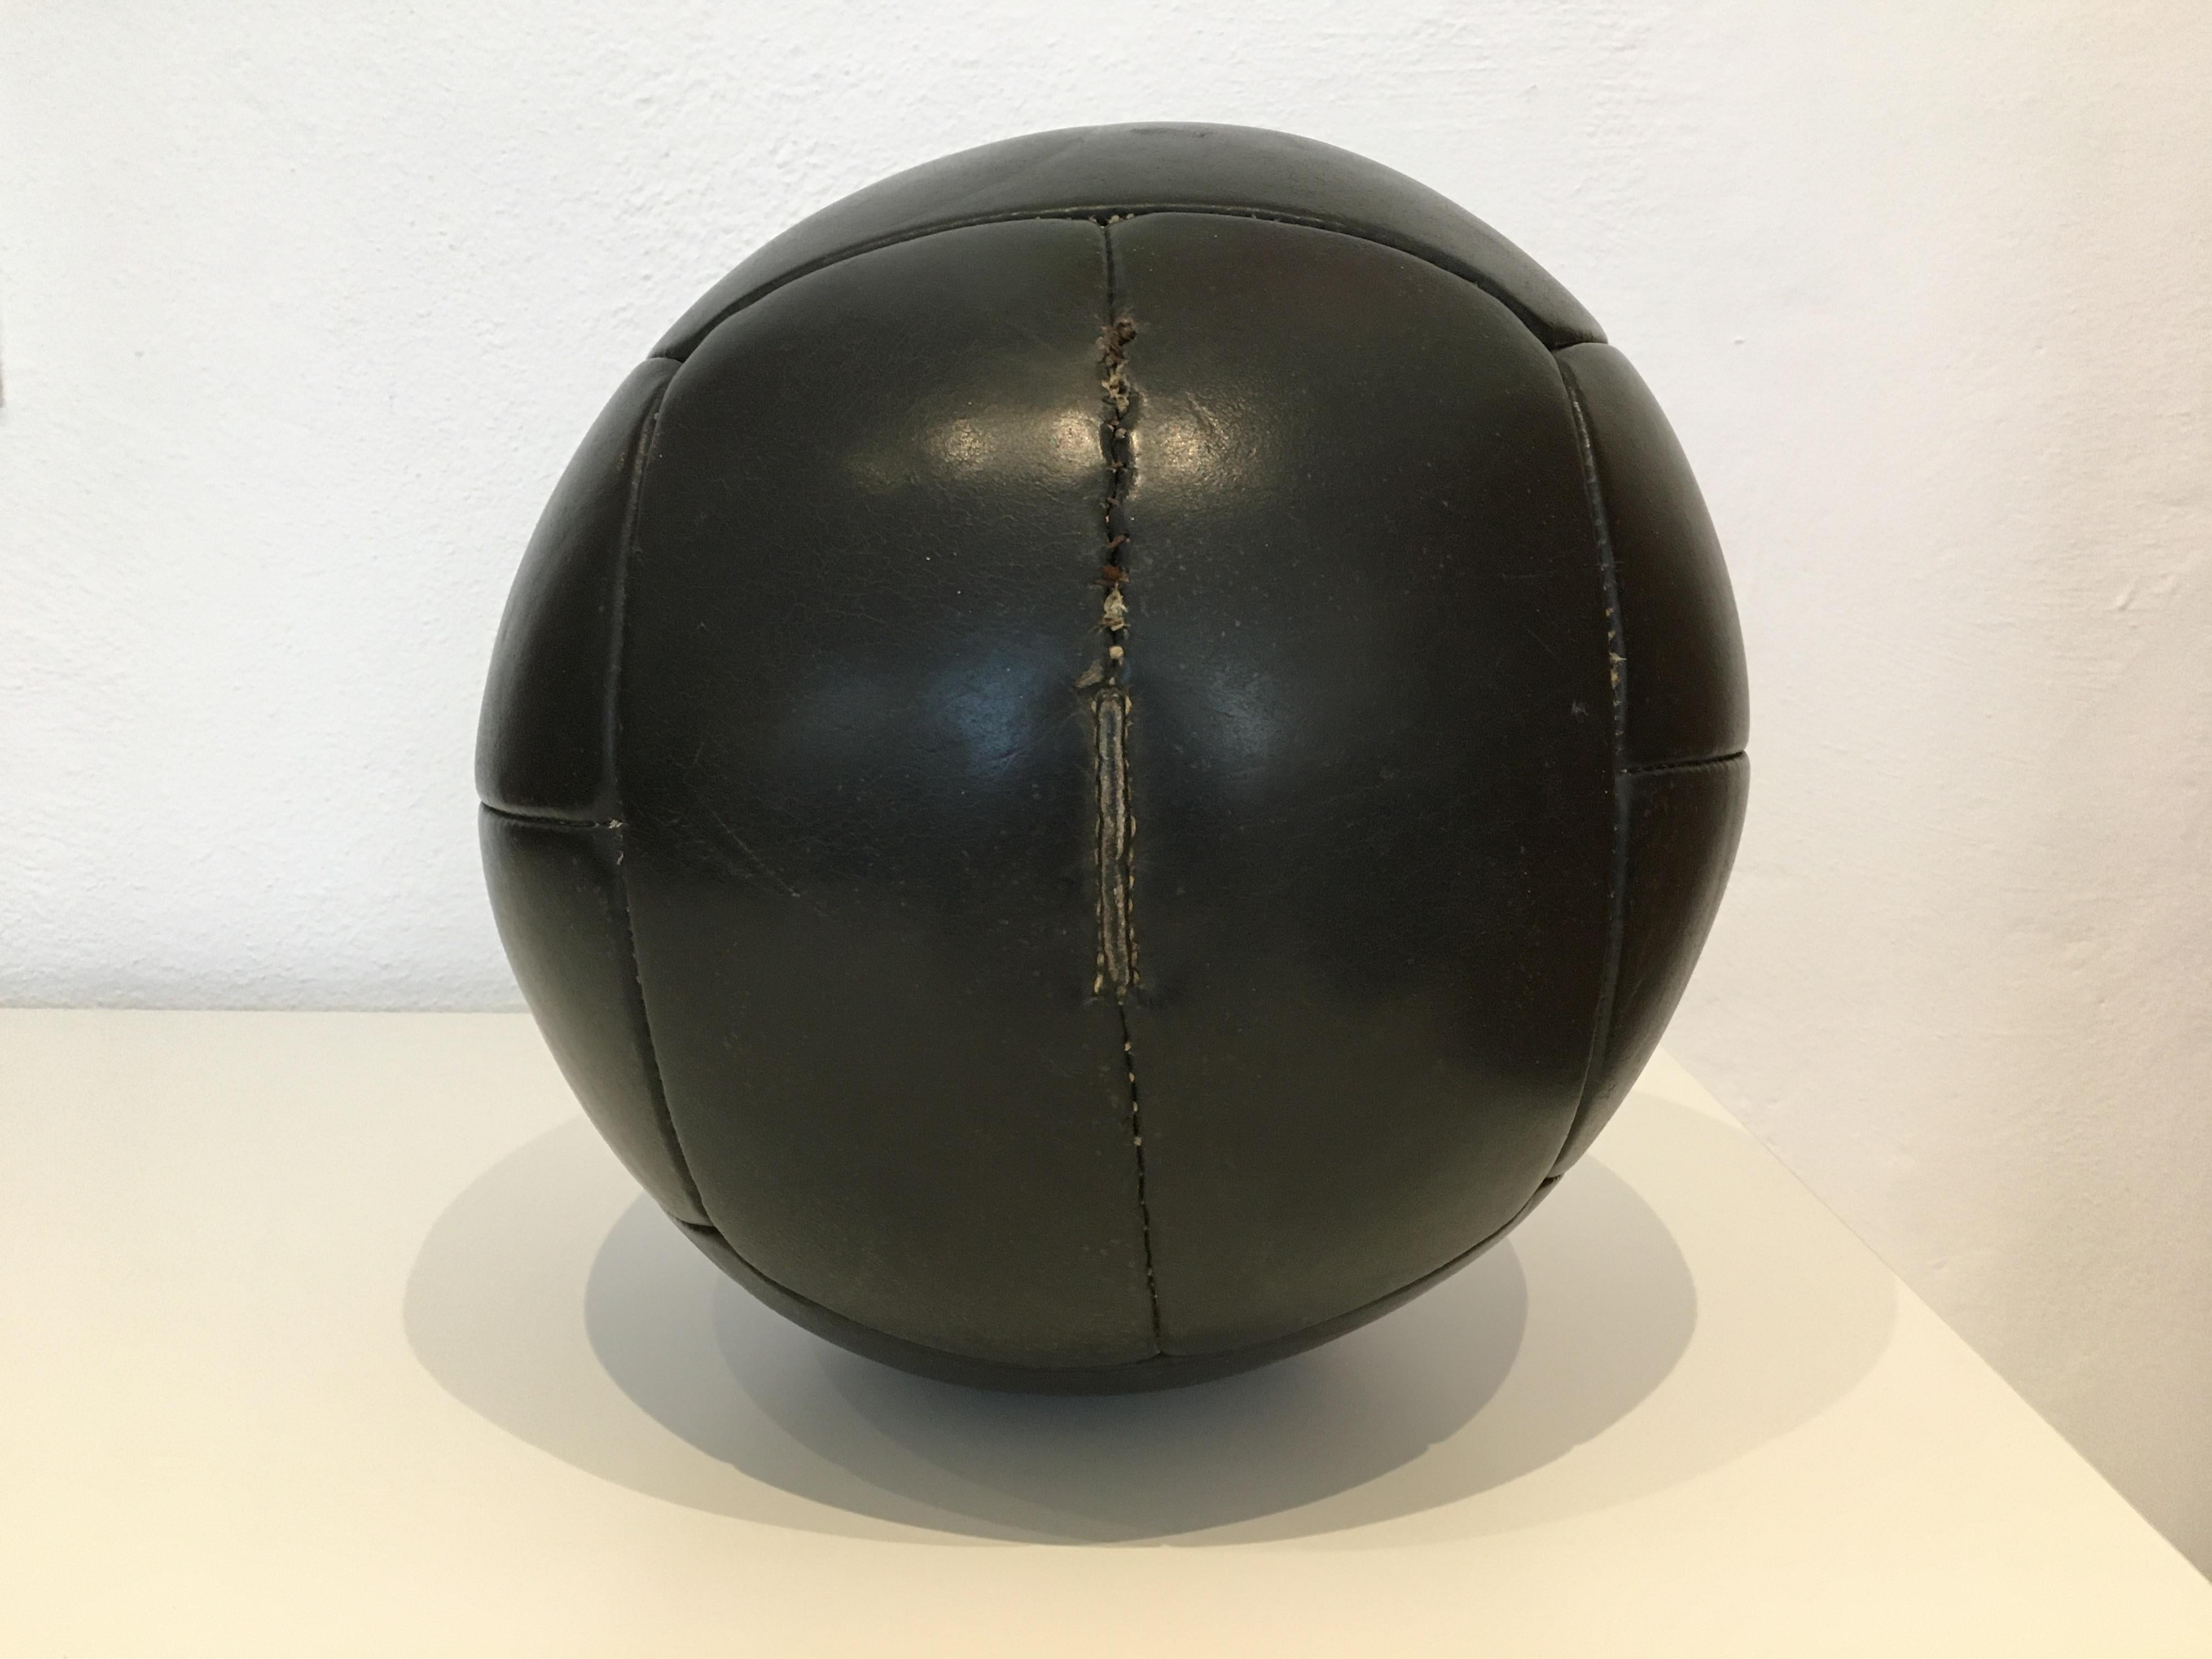 Vintage Black Leather Medicine Ball, 4kg, 1930s In Good Condition For Sale In Wien, AT